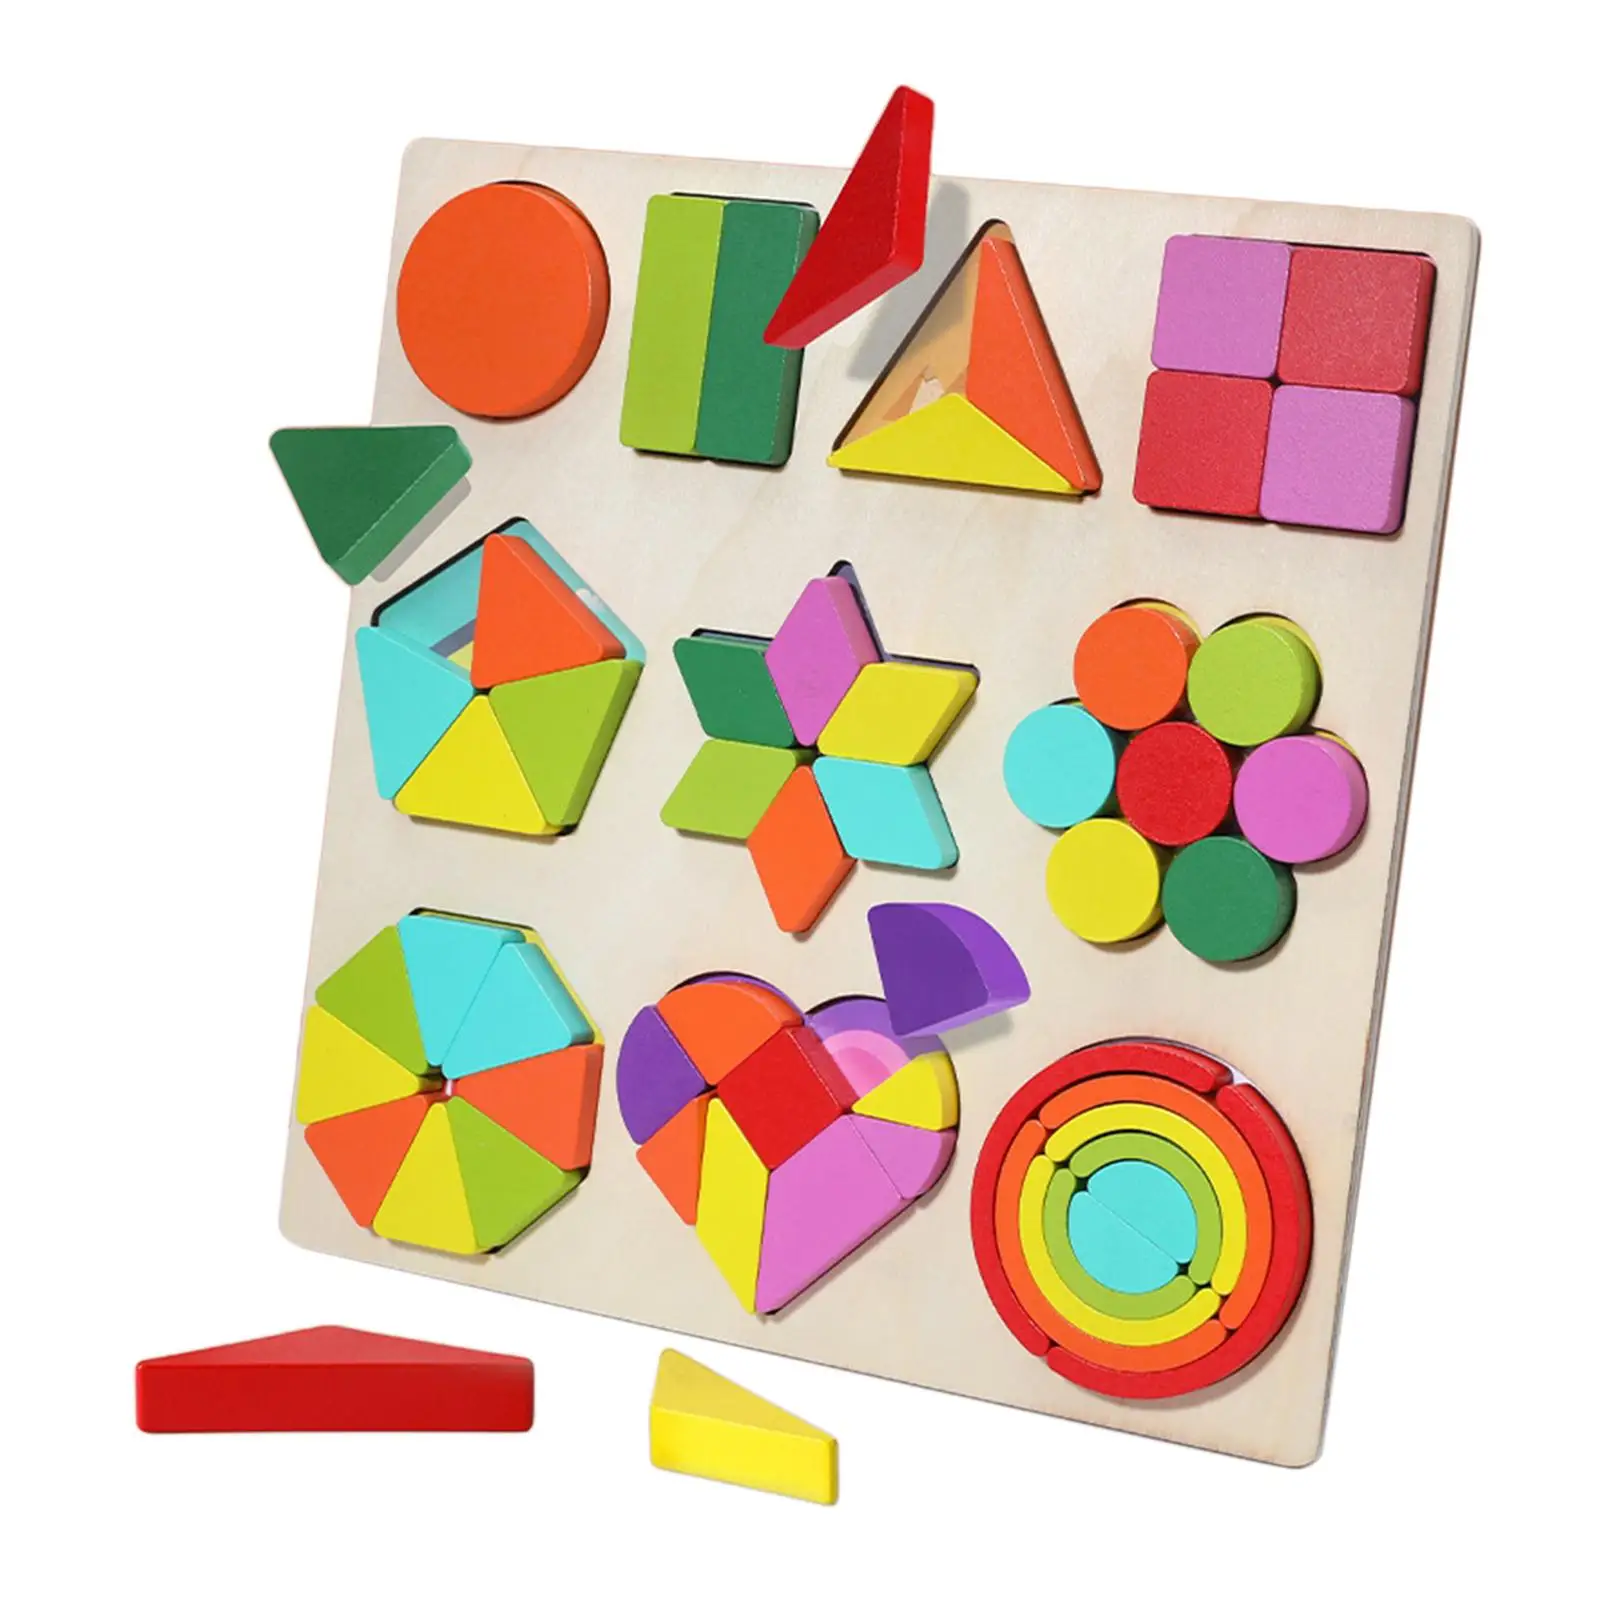 Wooden Wooden Puzzle Educational Developmental Toys Parent Child Game Geometric Manipulative Logical Skills Montessori Toddlers